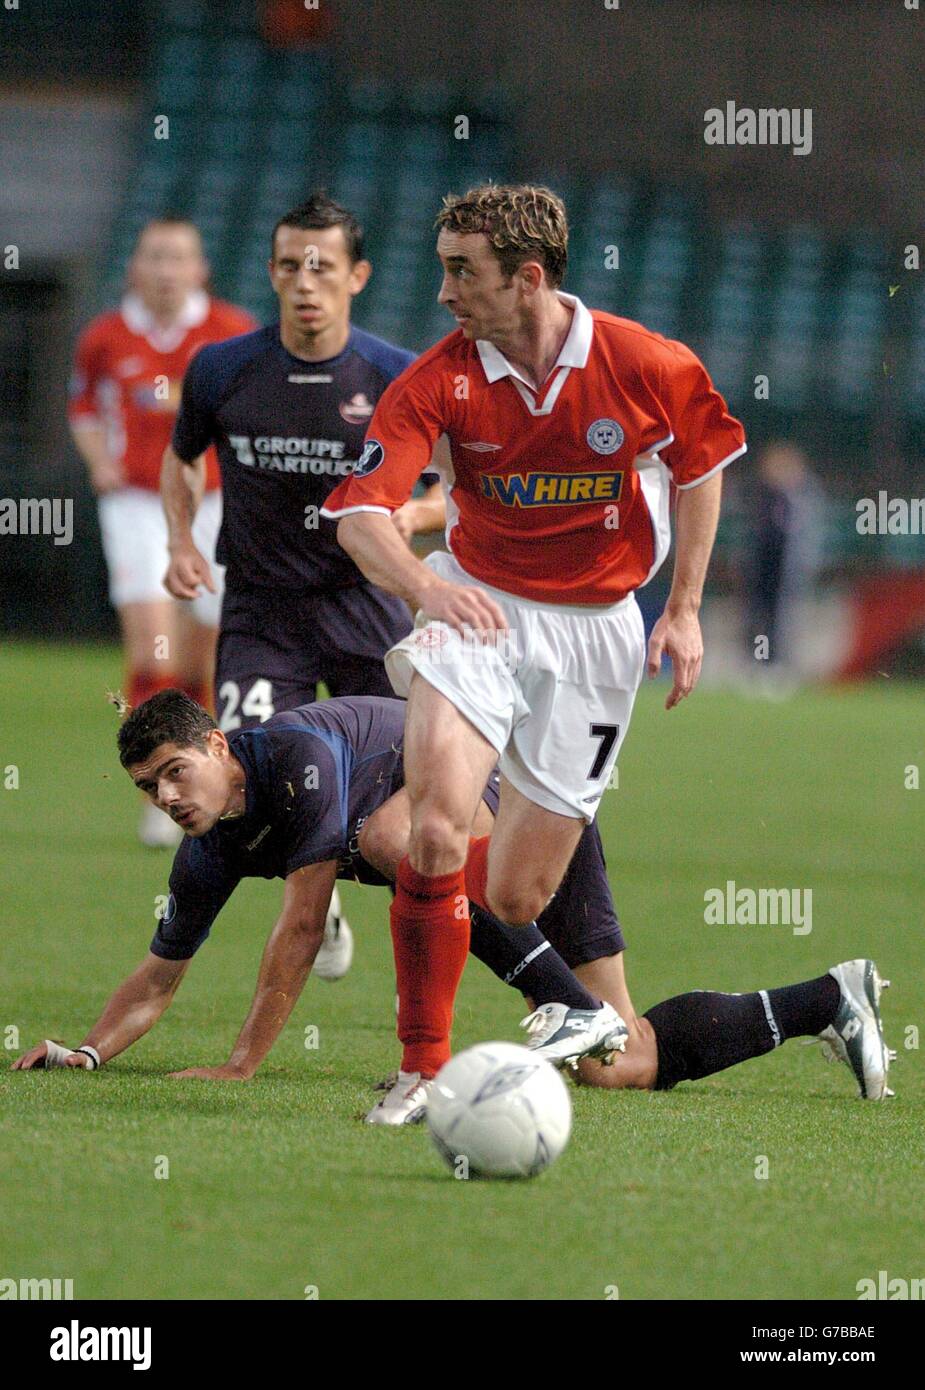 Shelbourne FC's Ollie Cahill bursts down the left wing past Lille OSC's Efstathios Tavlaridis, in the first-half of the Shelborne FC v Lille OSC UEFA Cup qualifier at Landsdowne Road, Dublin. Half-time score: Lille lead 2-0. Stock Photo